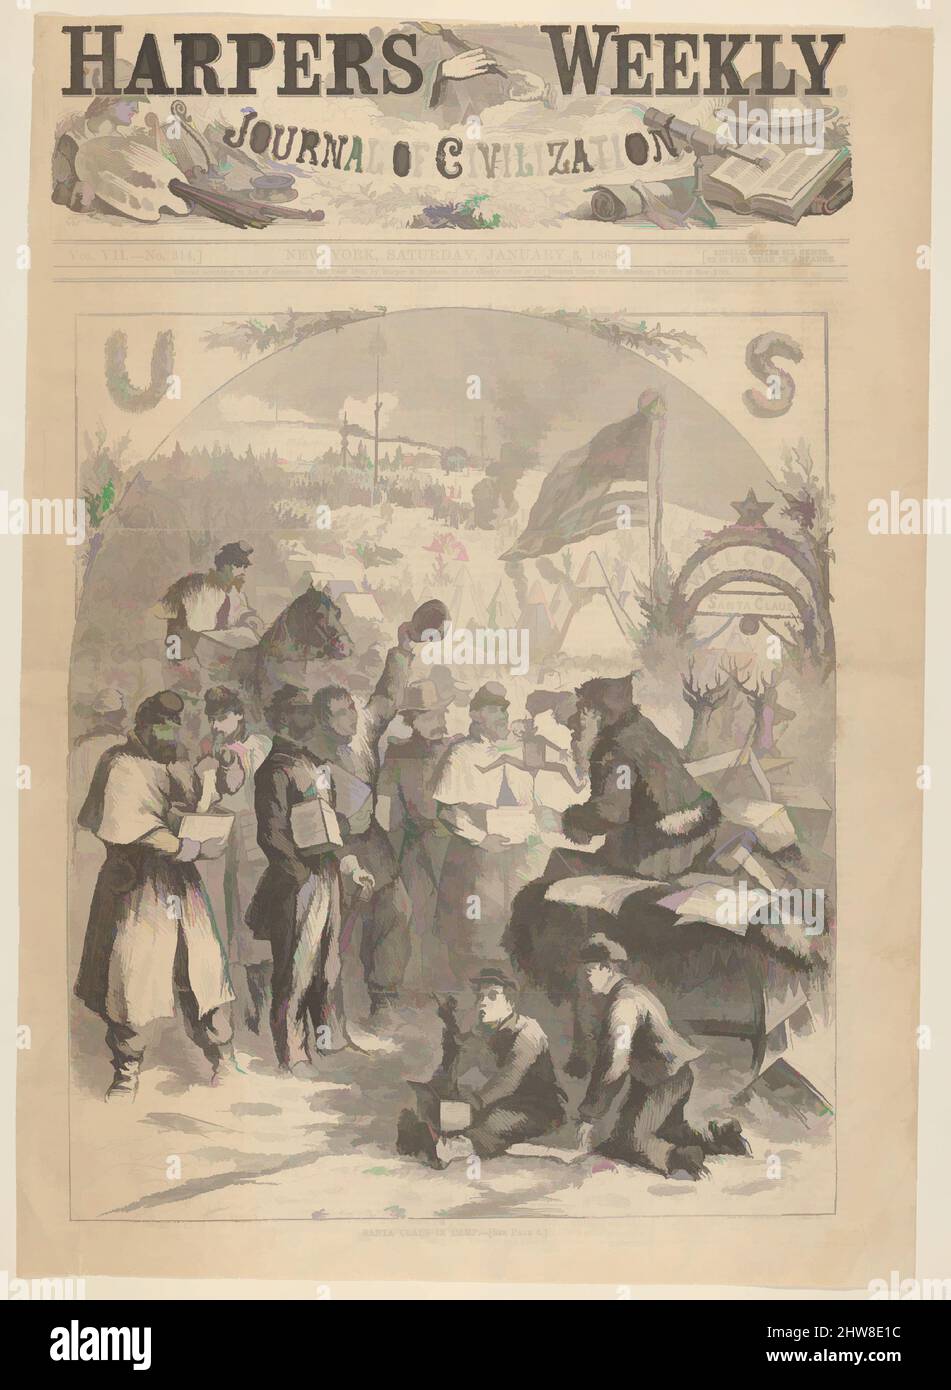 Art inspired by Santa Claus in Camp (from Harper's Weekly), January 3, 1863, Wood engraving, Sheet: 14 3/4 × 10 9/16 in. (37.4 × 26.8 cm), Prints, Thomas Nast (American (born Germany), Landau 1840–1902 Guayaquil), Nast's image was published in the 1862 Christmas issue of Harper’s, Classic works modernized by Artotop with a splash of modernity. Shapes, color and value, eye-catching visual impact on art. Emotions through freedom of artworks in a contemporary way. A timeless message pursuing a wildly creative new direction. Artists turning to the digital medium and creating the Artotop NFT Stock Photo